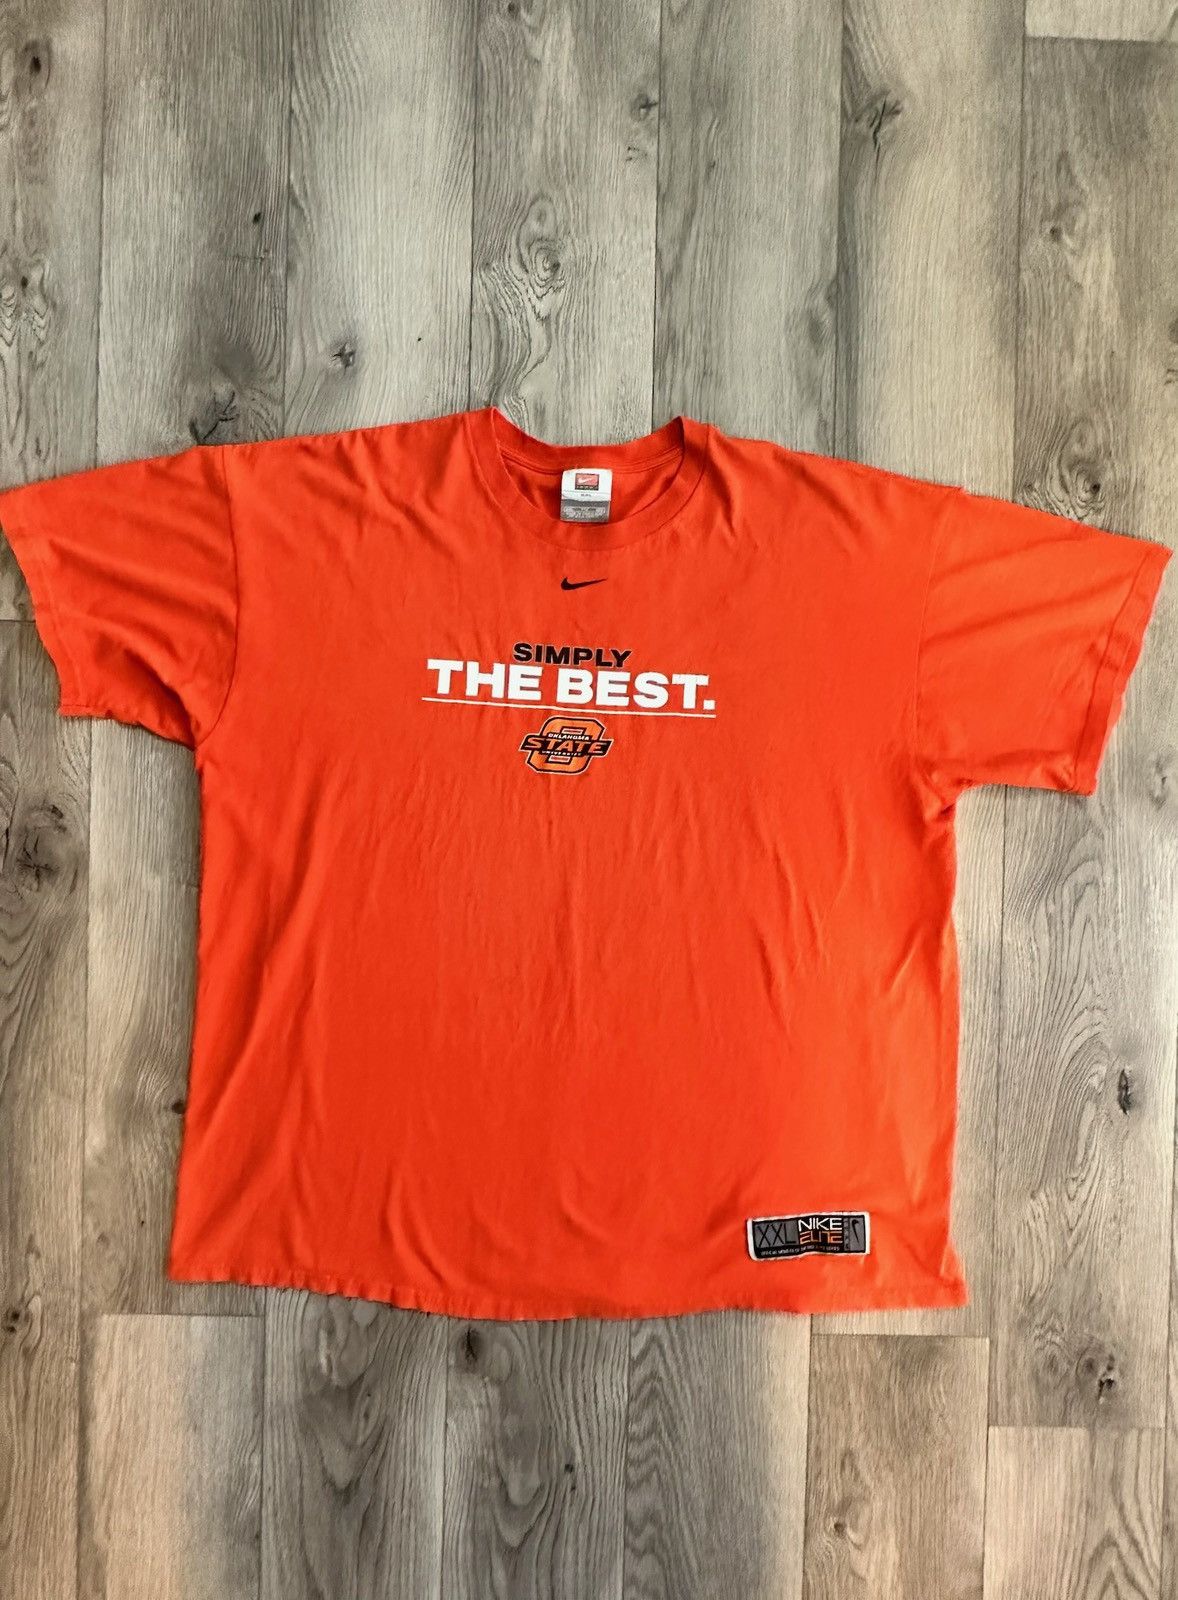 Nike Vintage Oklahoma State “Simply The Best” Tee Size US XXL / EU 58 / 5 - 1 Preview